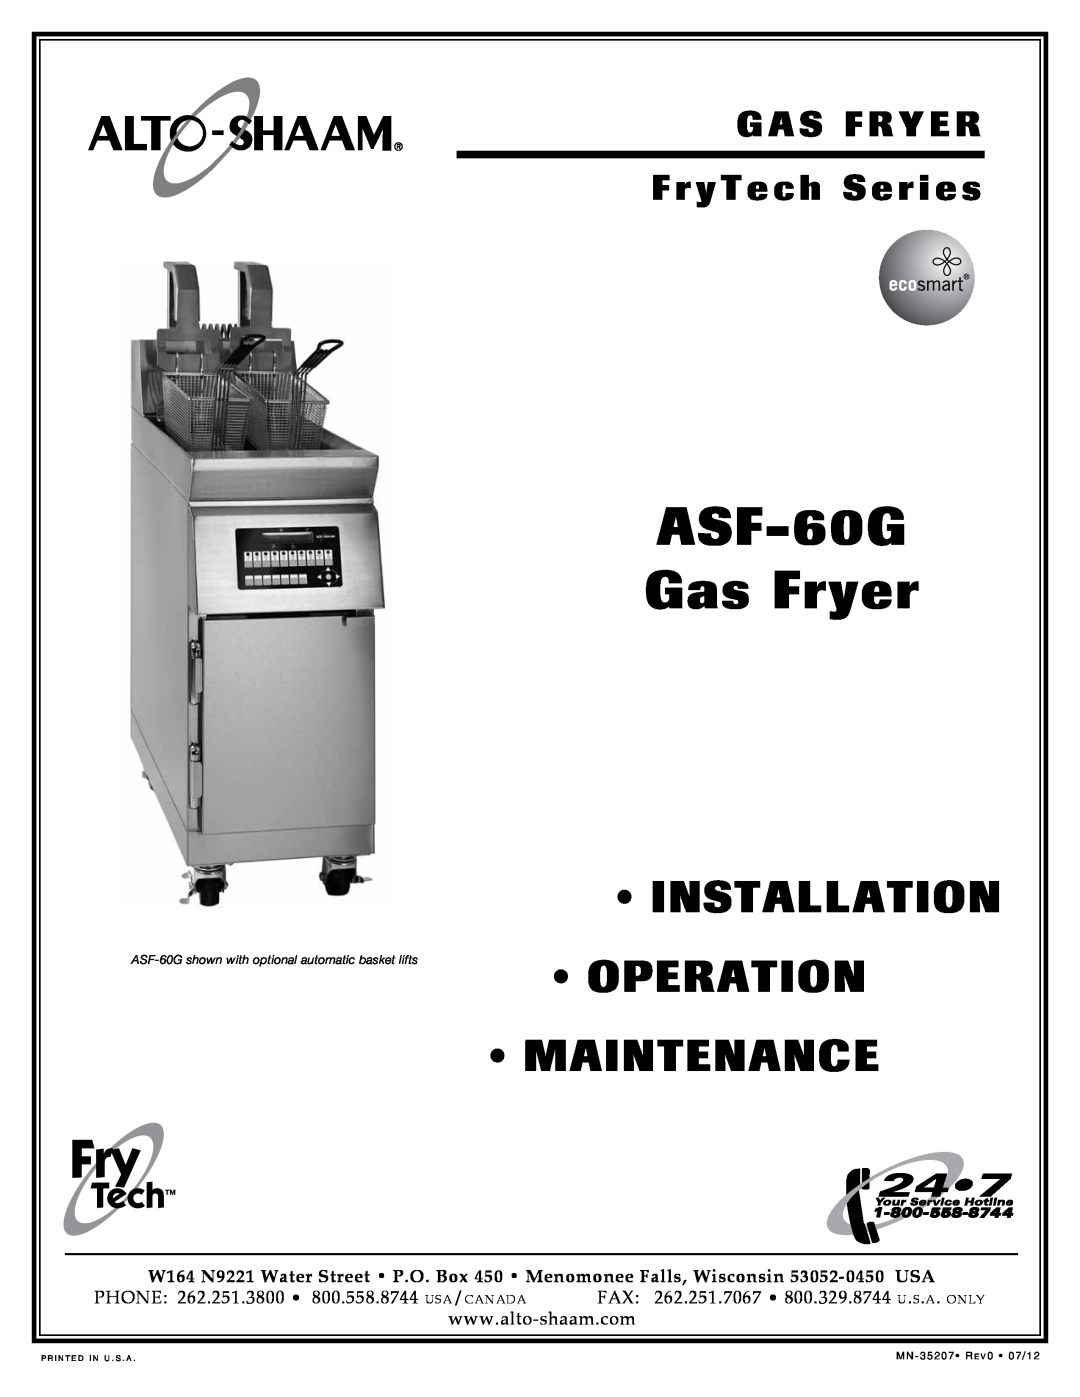 Alto-Shaam specifications Open G As Fr Yer, ASF-60G Open Gas F ryer with Basic Co ntrol, Tech, Item No 